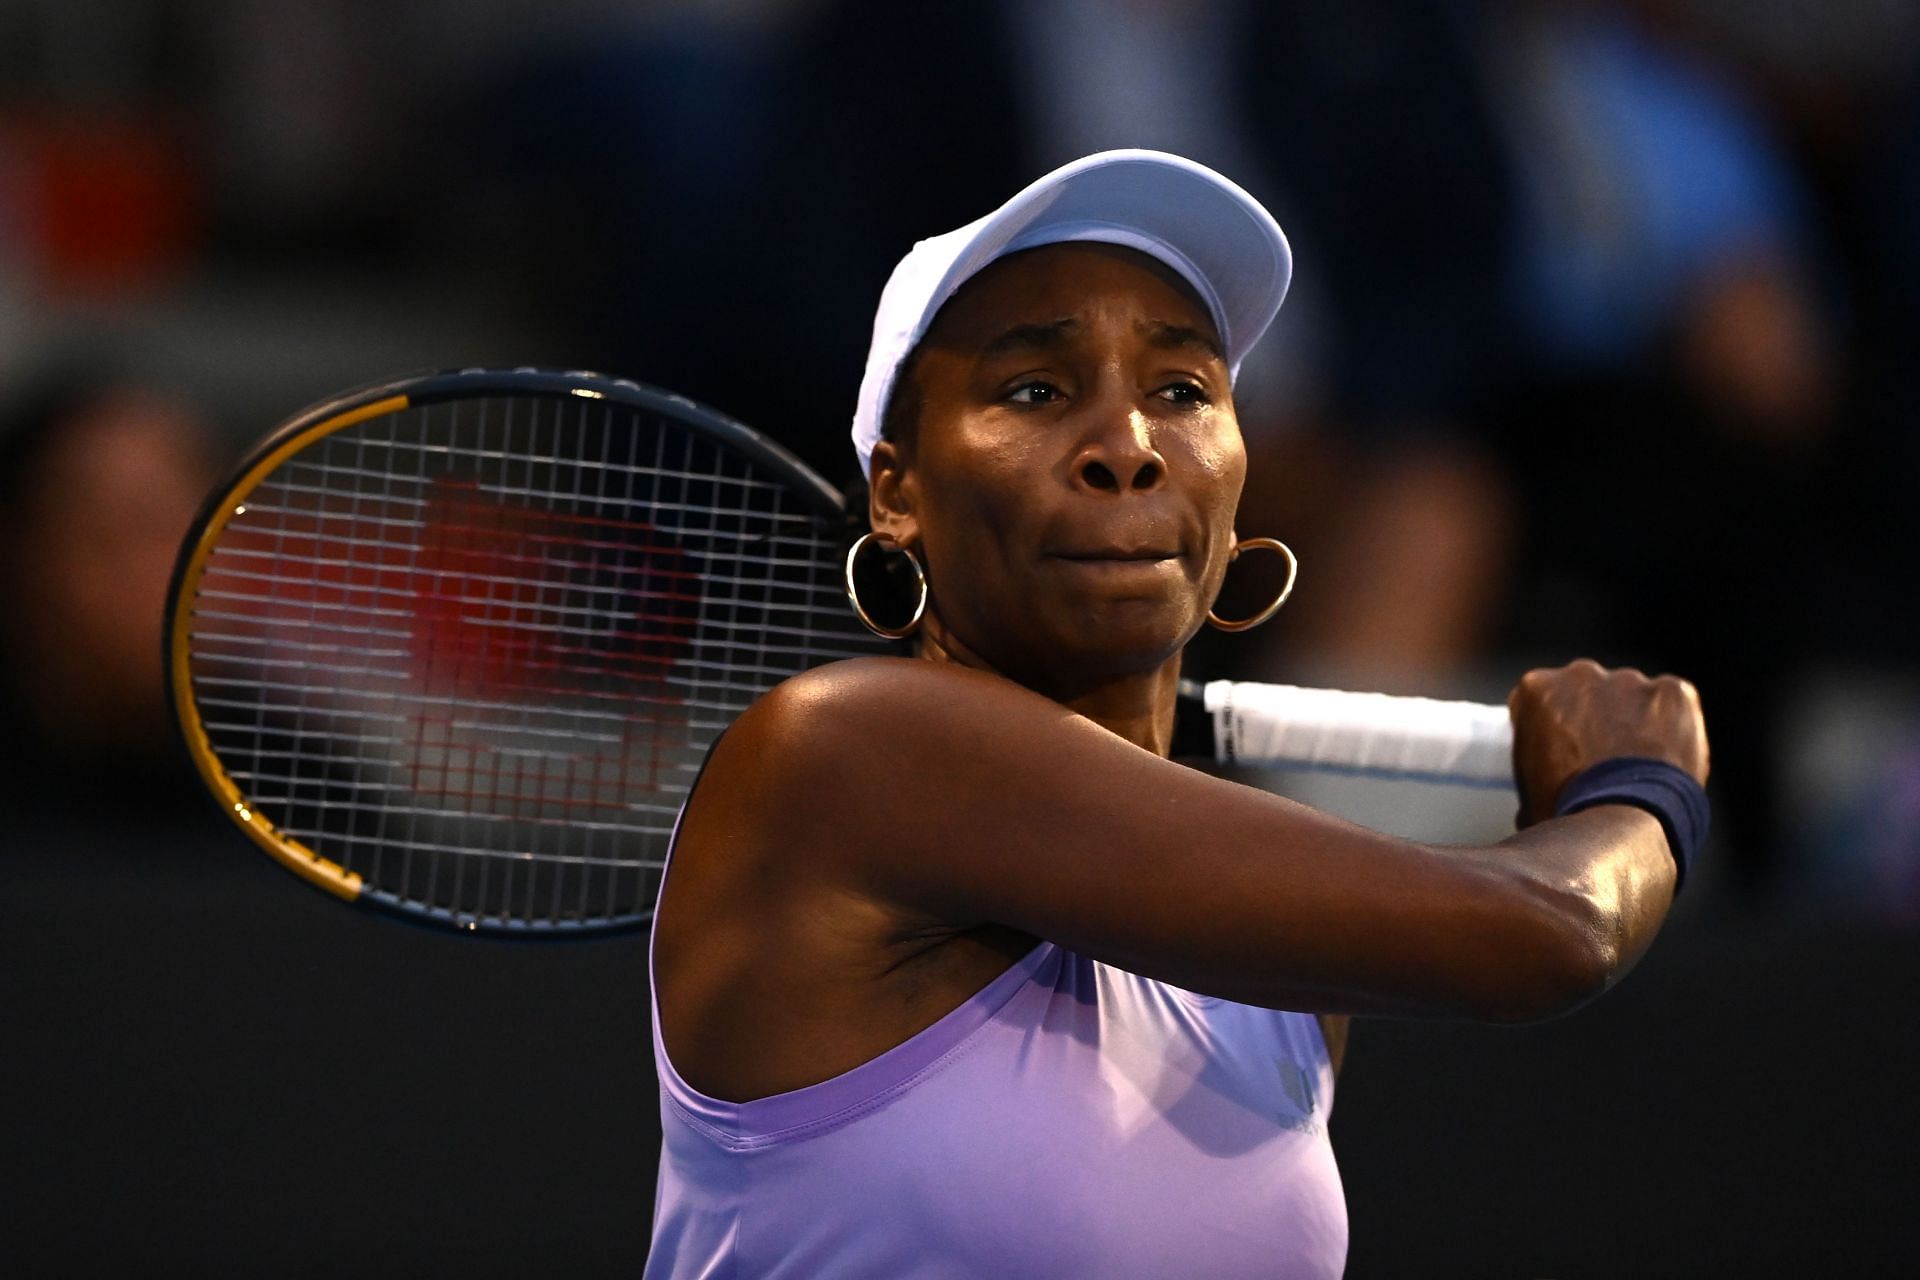 Venus Williams gears up for 1R match at Libema Open